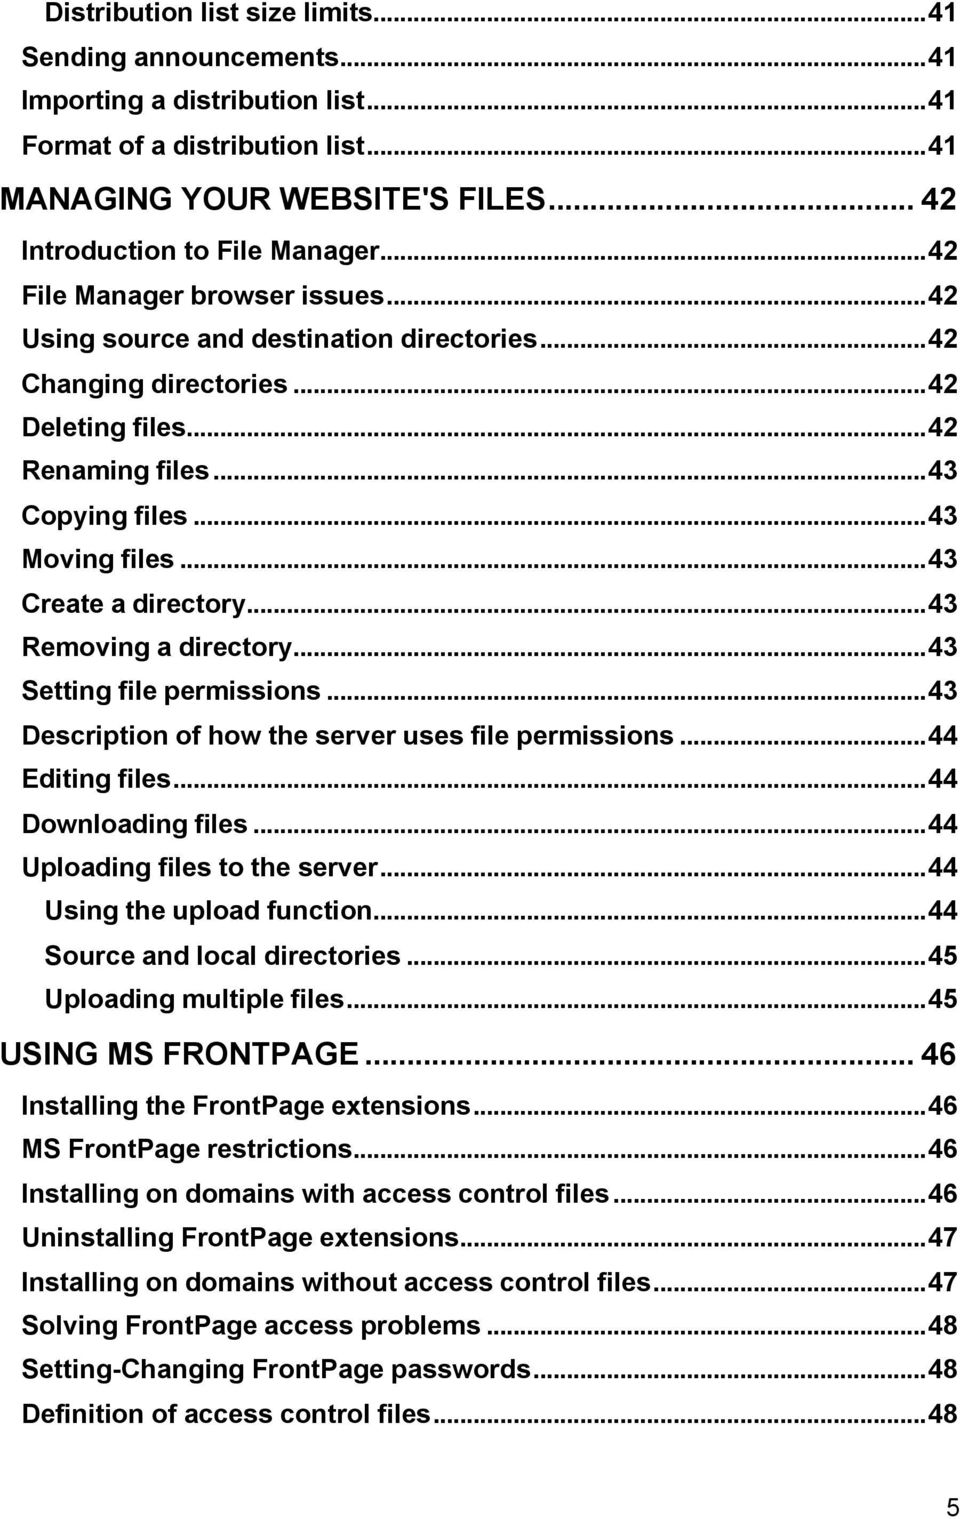 ..43 Create a directory...43 Removing a directory...43 Setting file permissions...43 Description of how the server uses file permissions...44 Editing files...44 Downloading files.